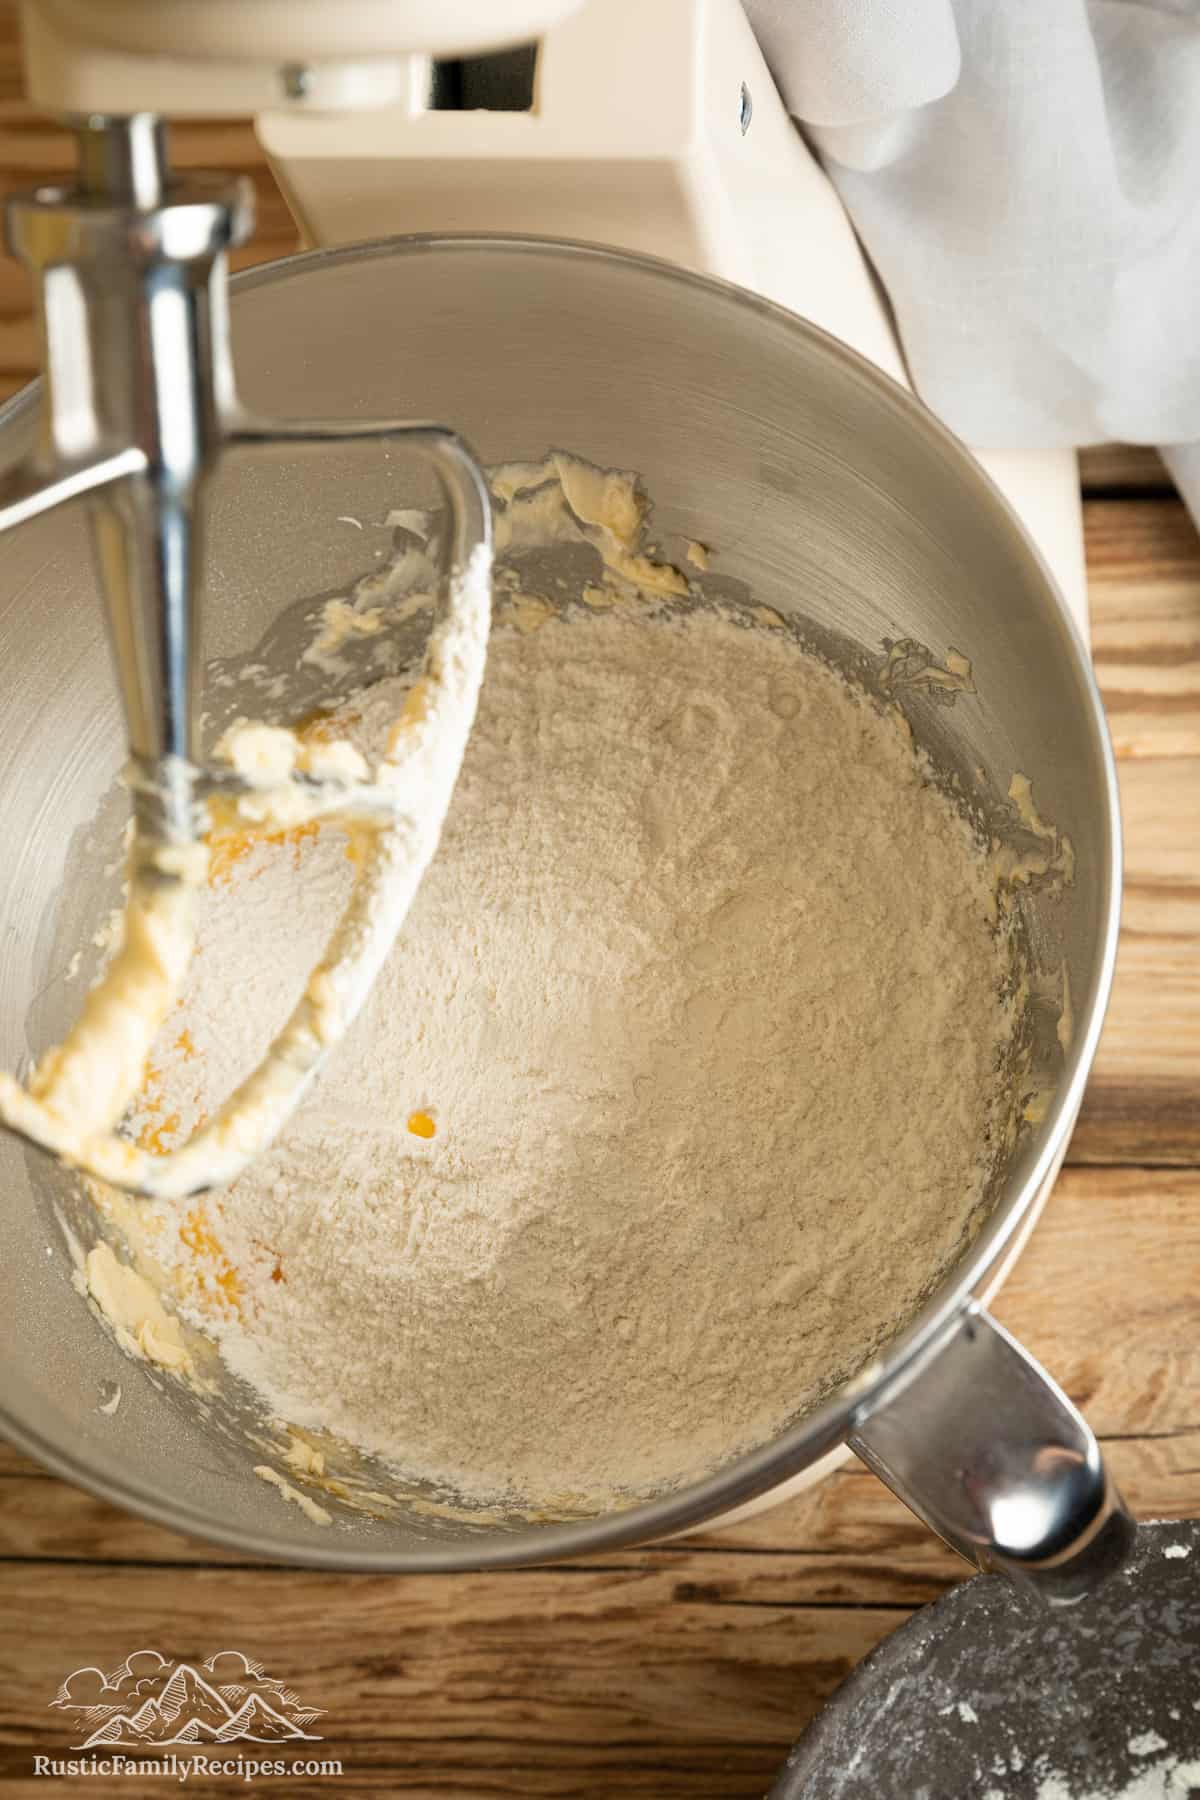 Dry ingredients are added to the wet ingredients for cake batter inside the bowl of a stand mixer.